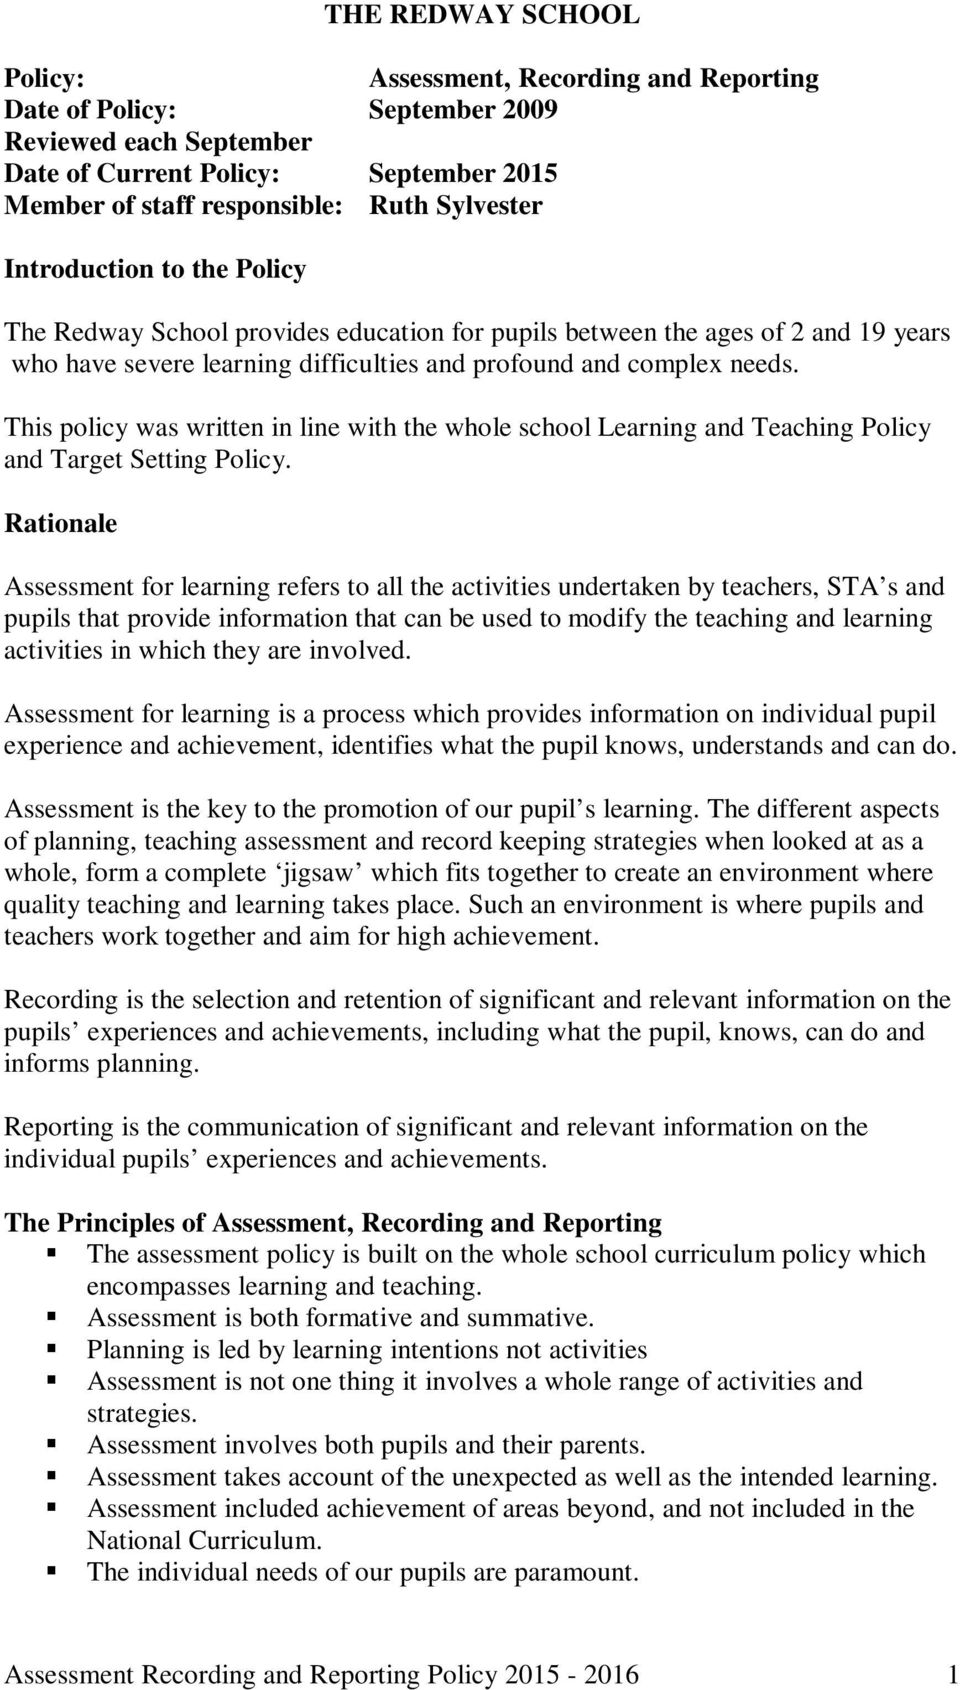 This policy was written in line with the whole school Learning and Teaching Policy and Target Setting Policy.